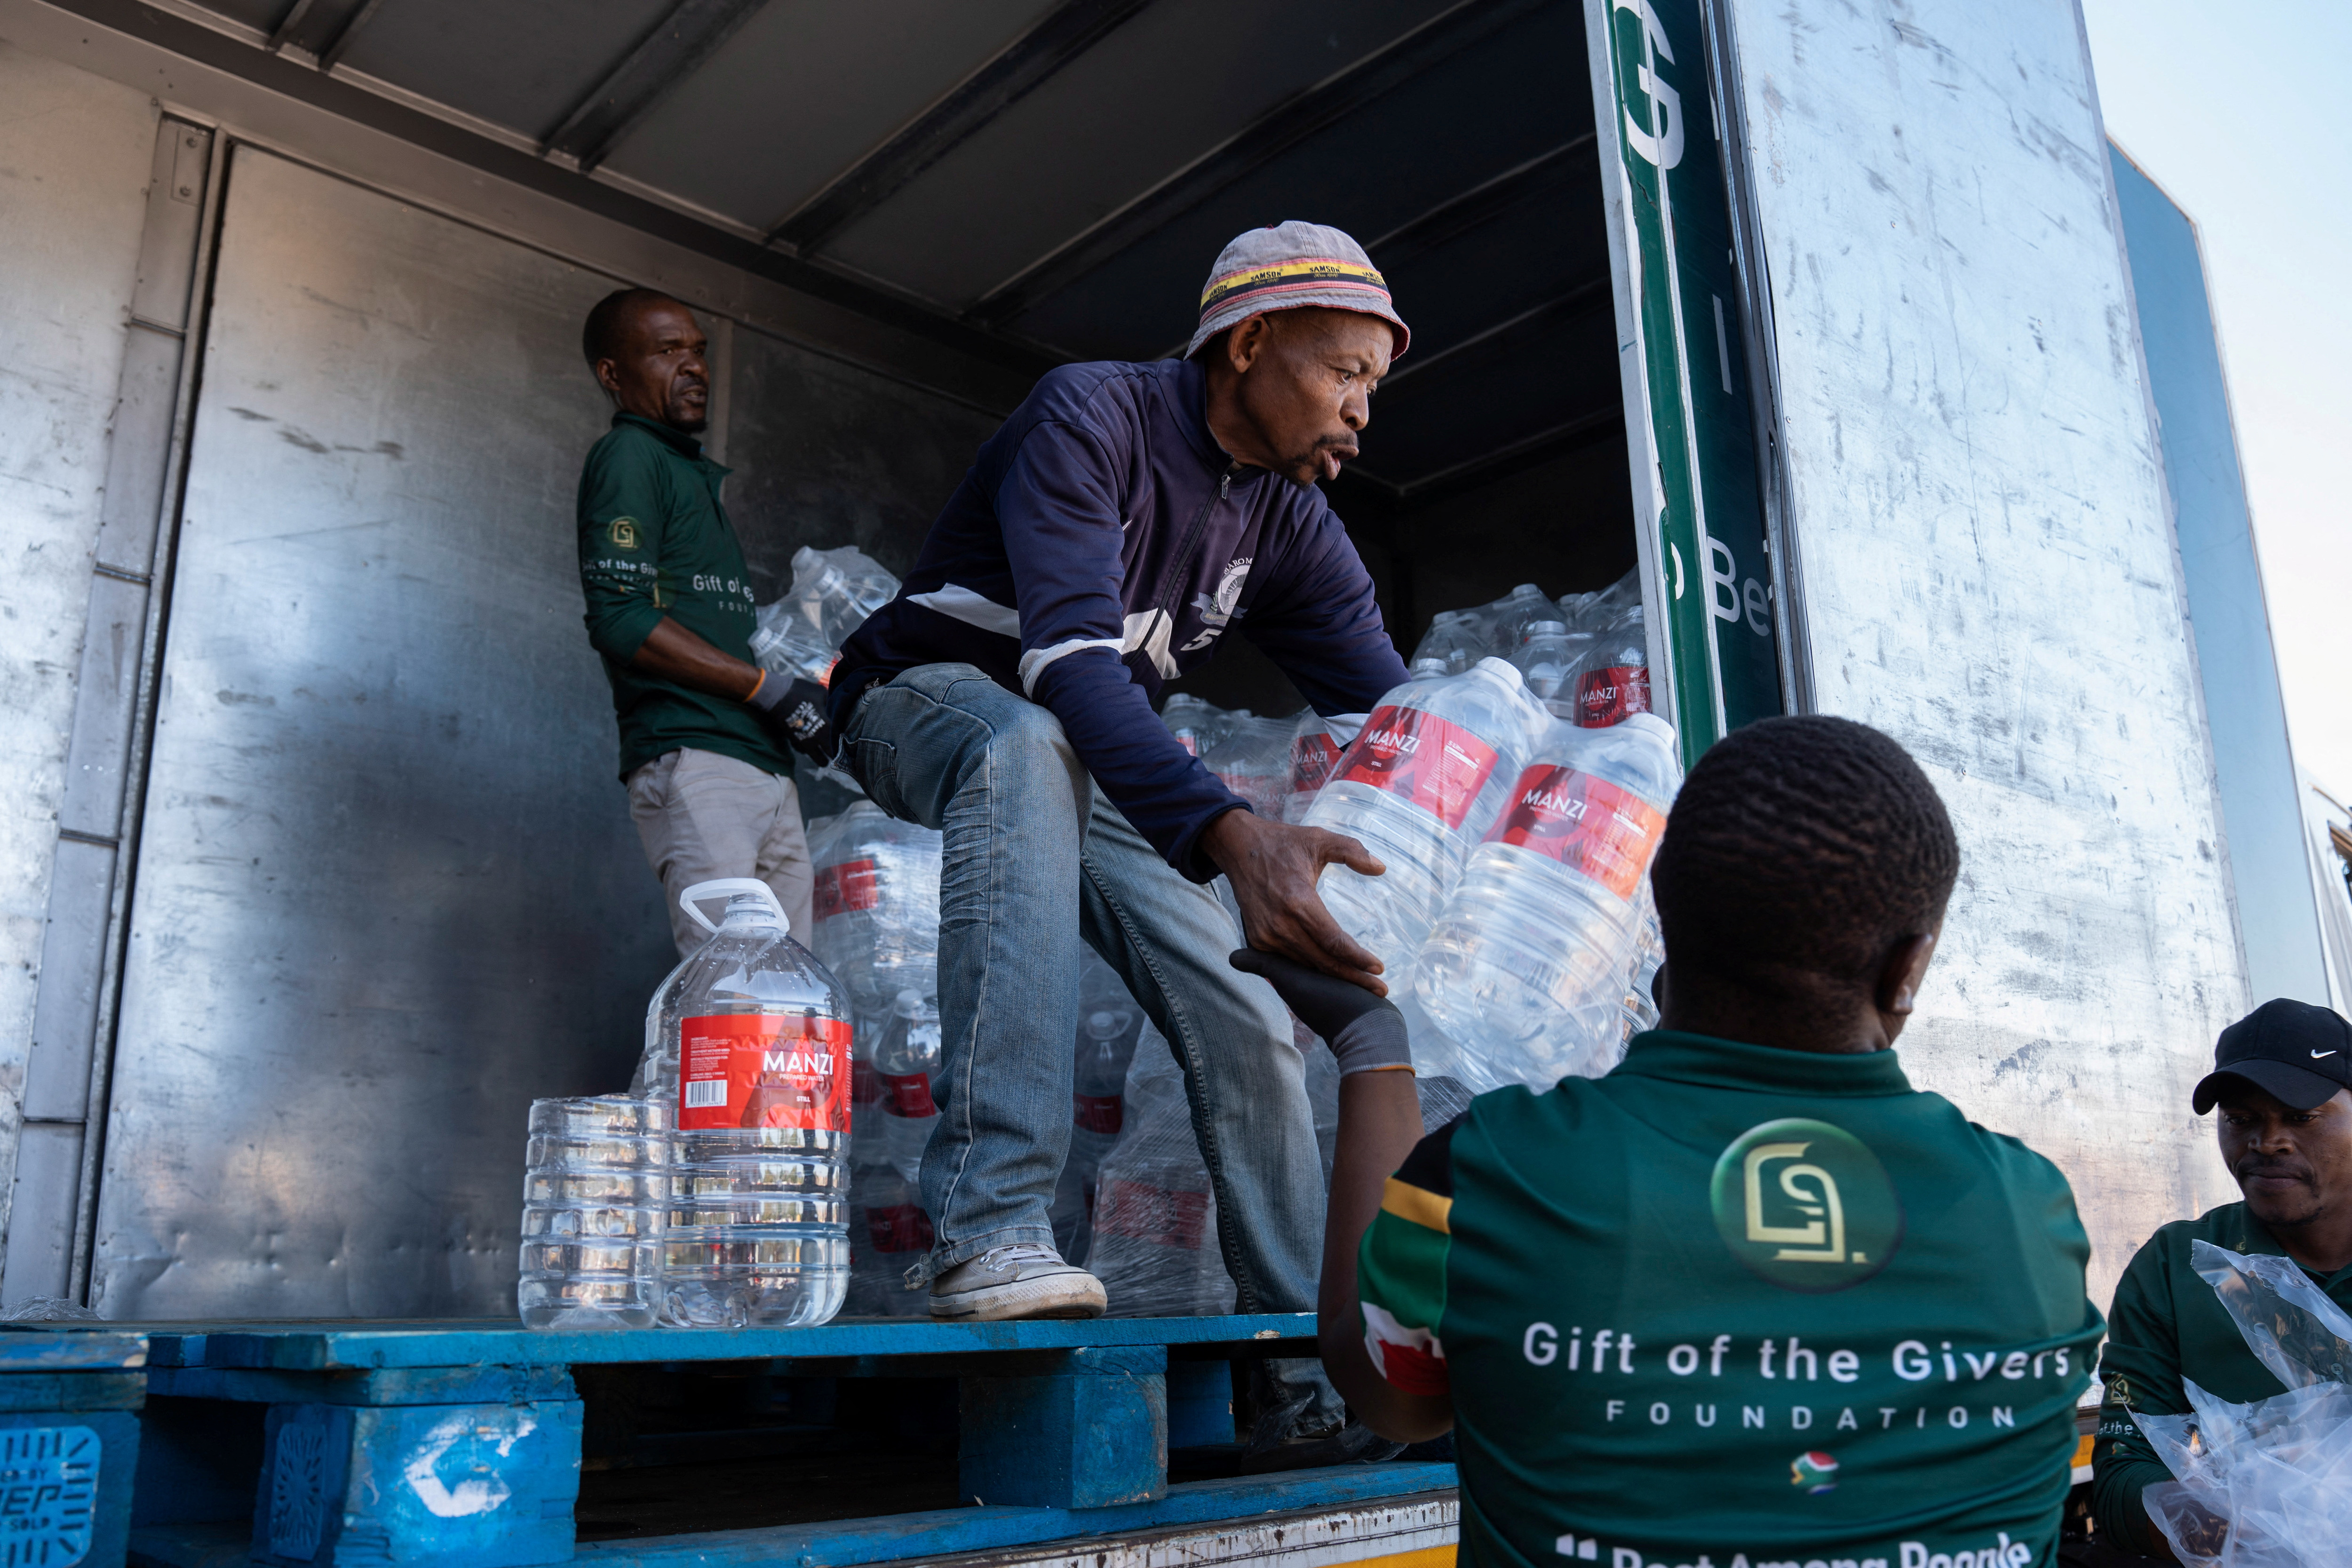 South Africa cholera outbreak re-ignites anger over poor services